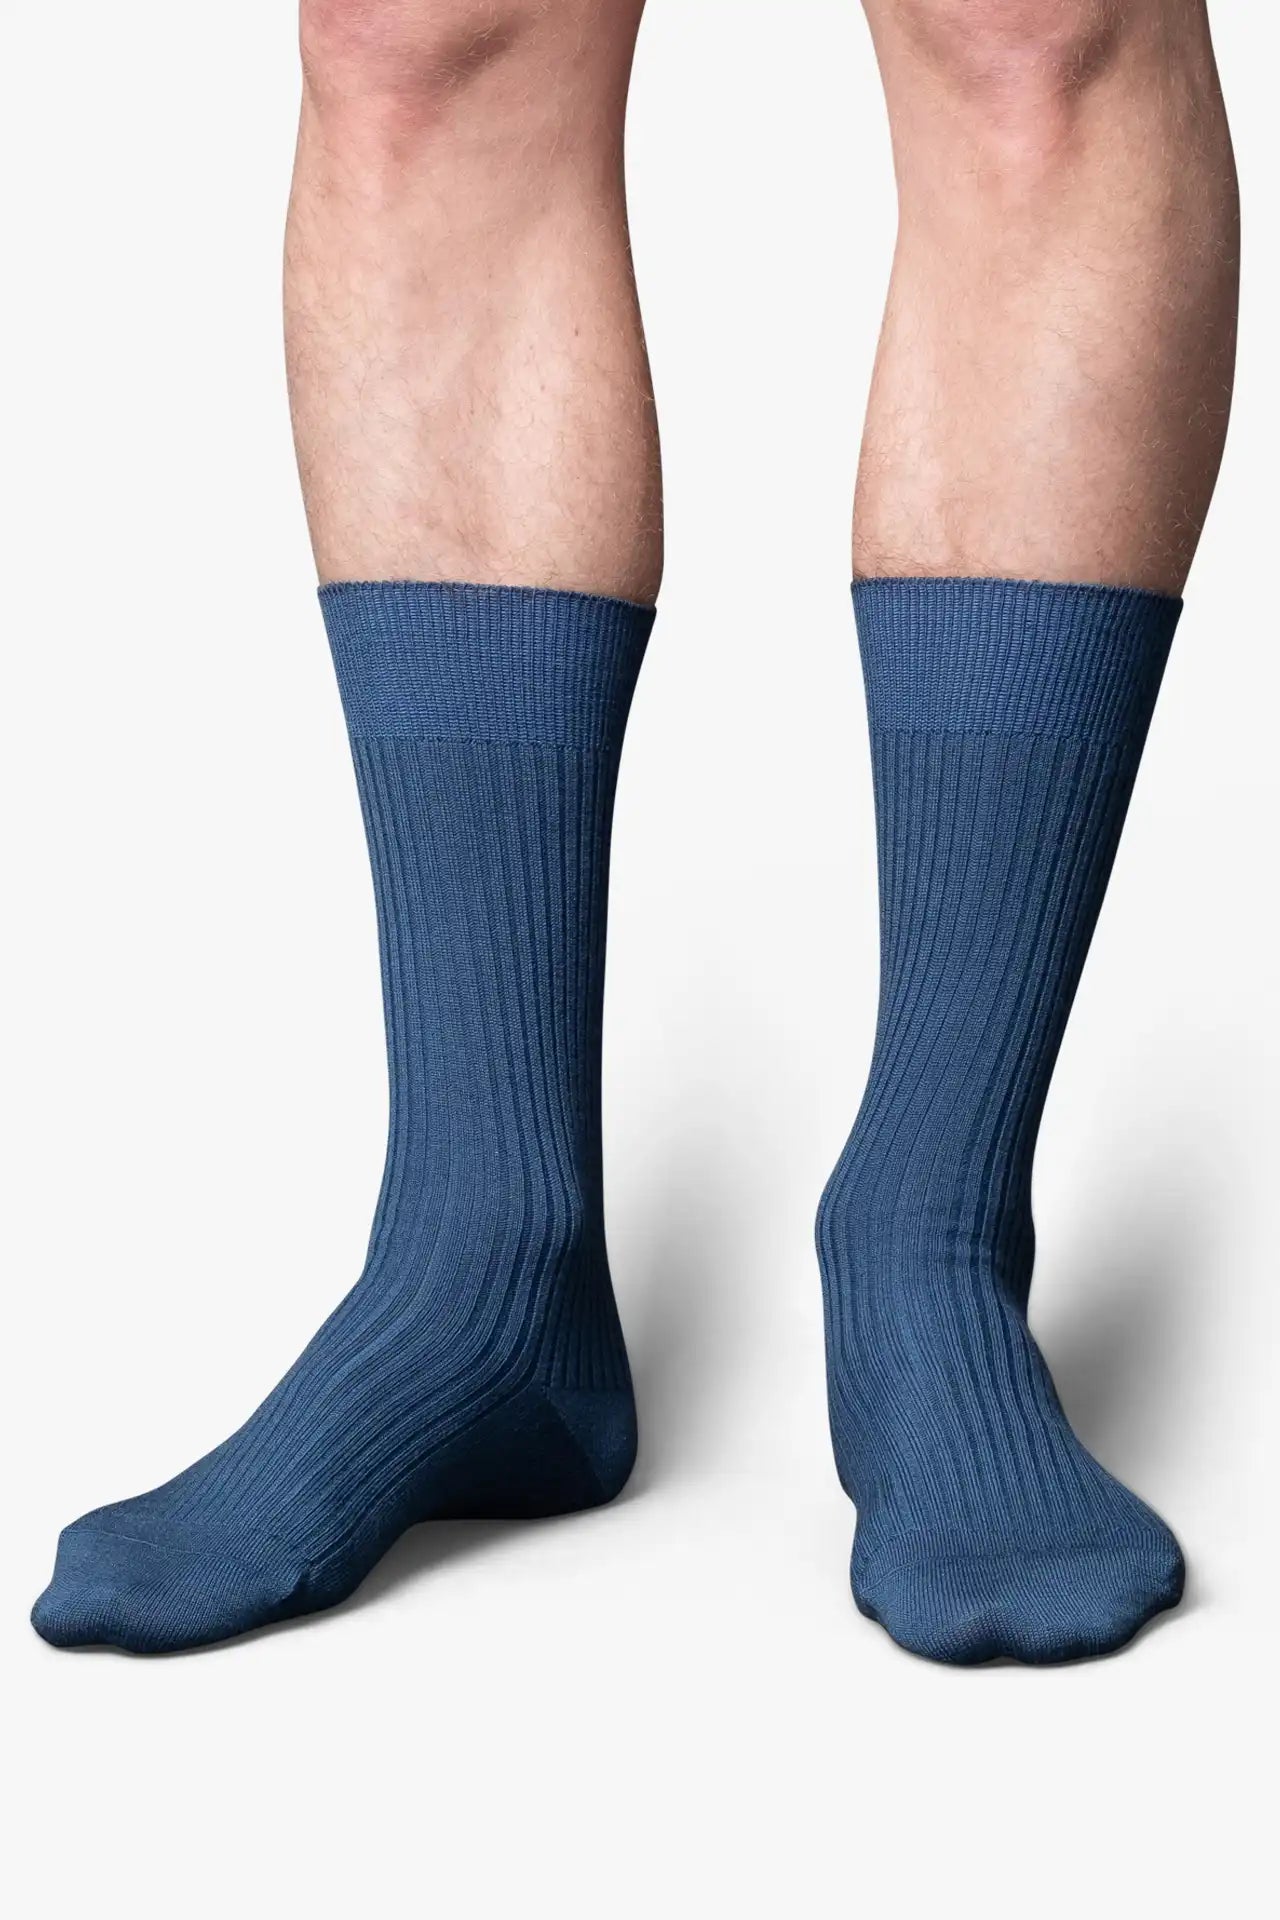 Ocean blue socks in merino wool. Swedish design by once a day and produced by glenn clyde. Can we washed in warm water without shrinking.